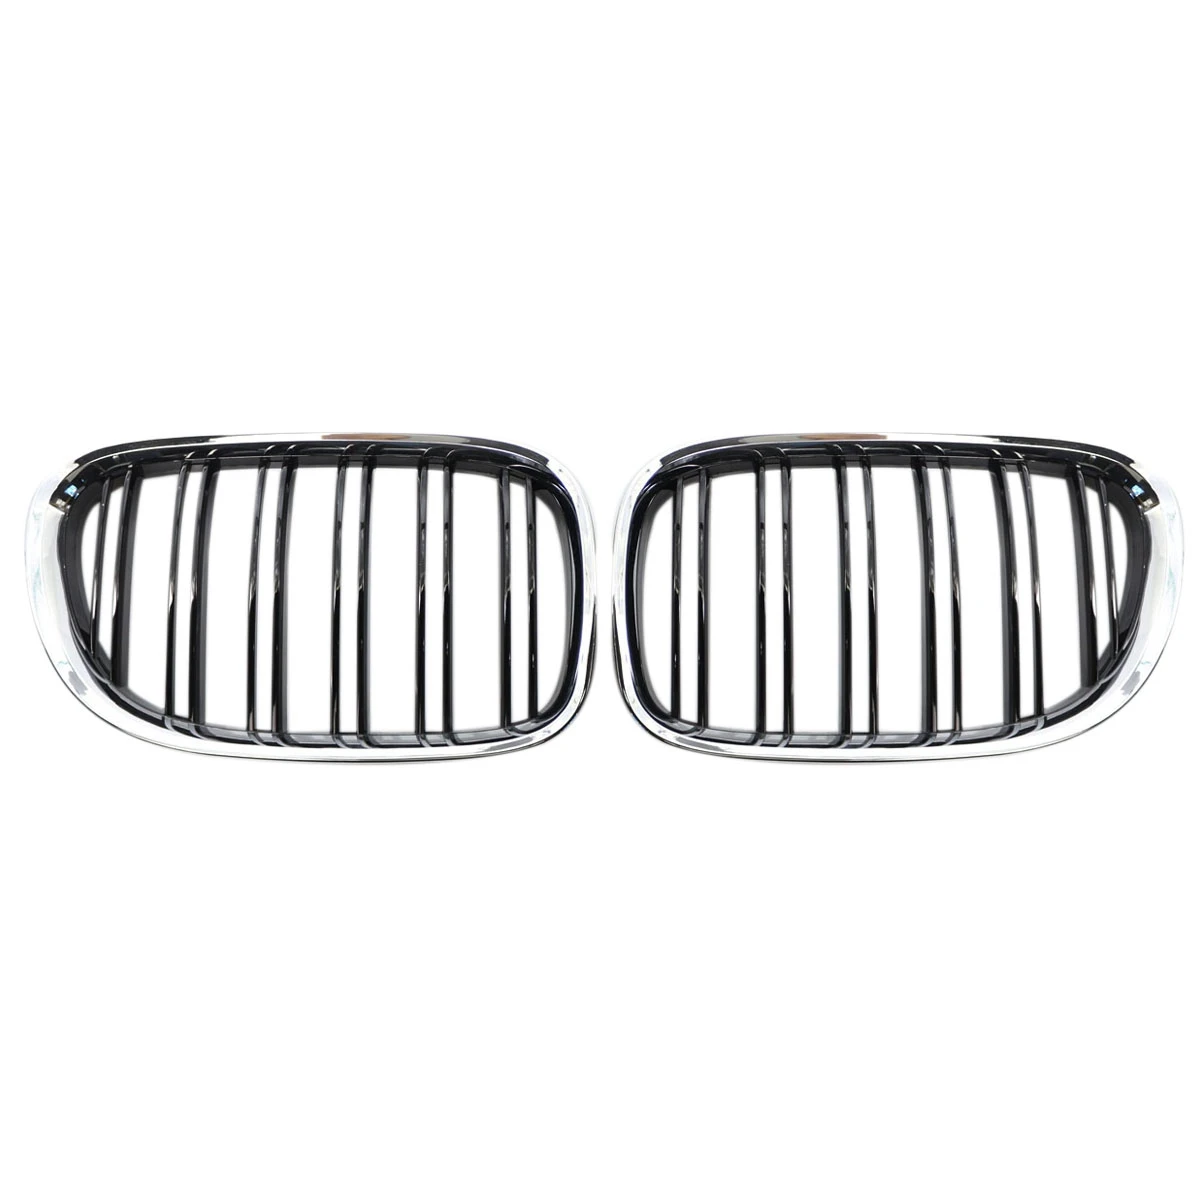 

Grill Black Chrome for -BMW 2009-2015 7-Series F01 F02 Front Grille Double Line Hood Grills 730D 740I 740Li